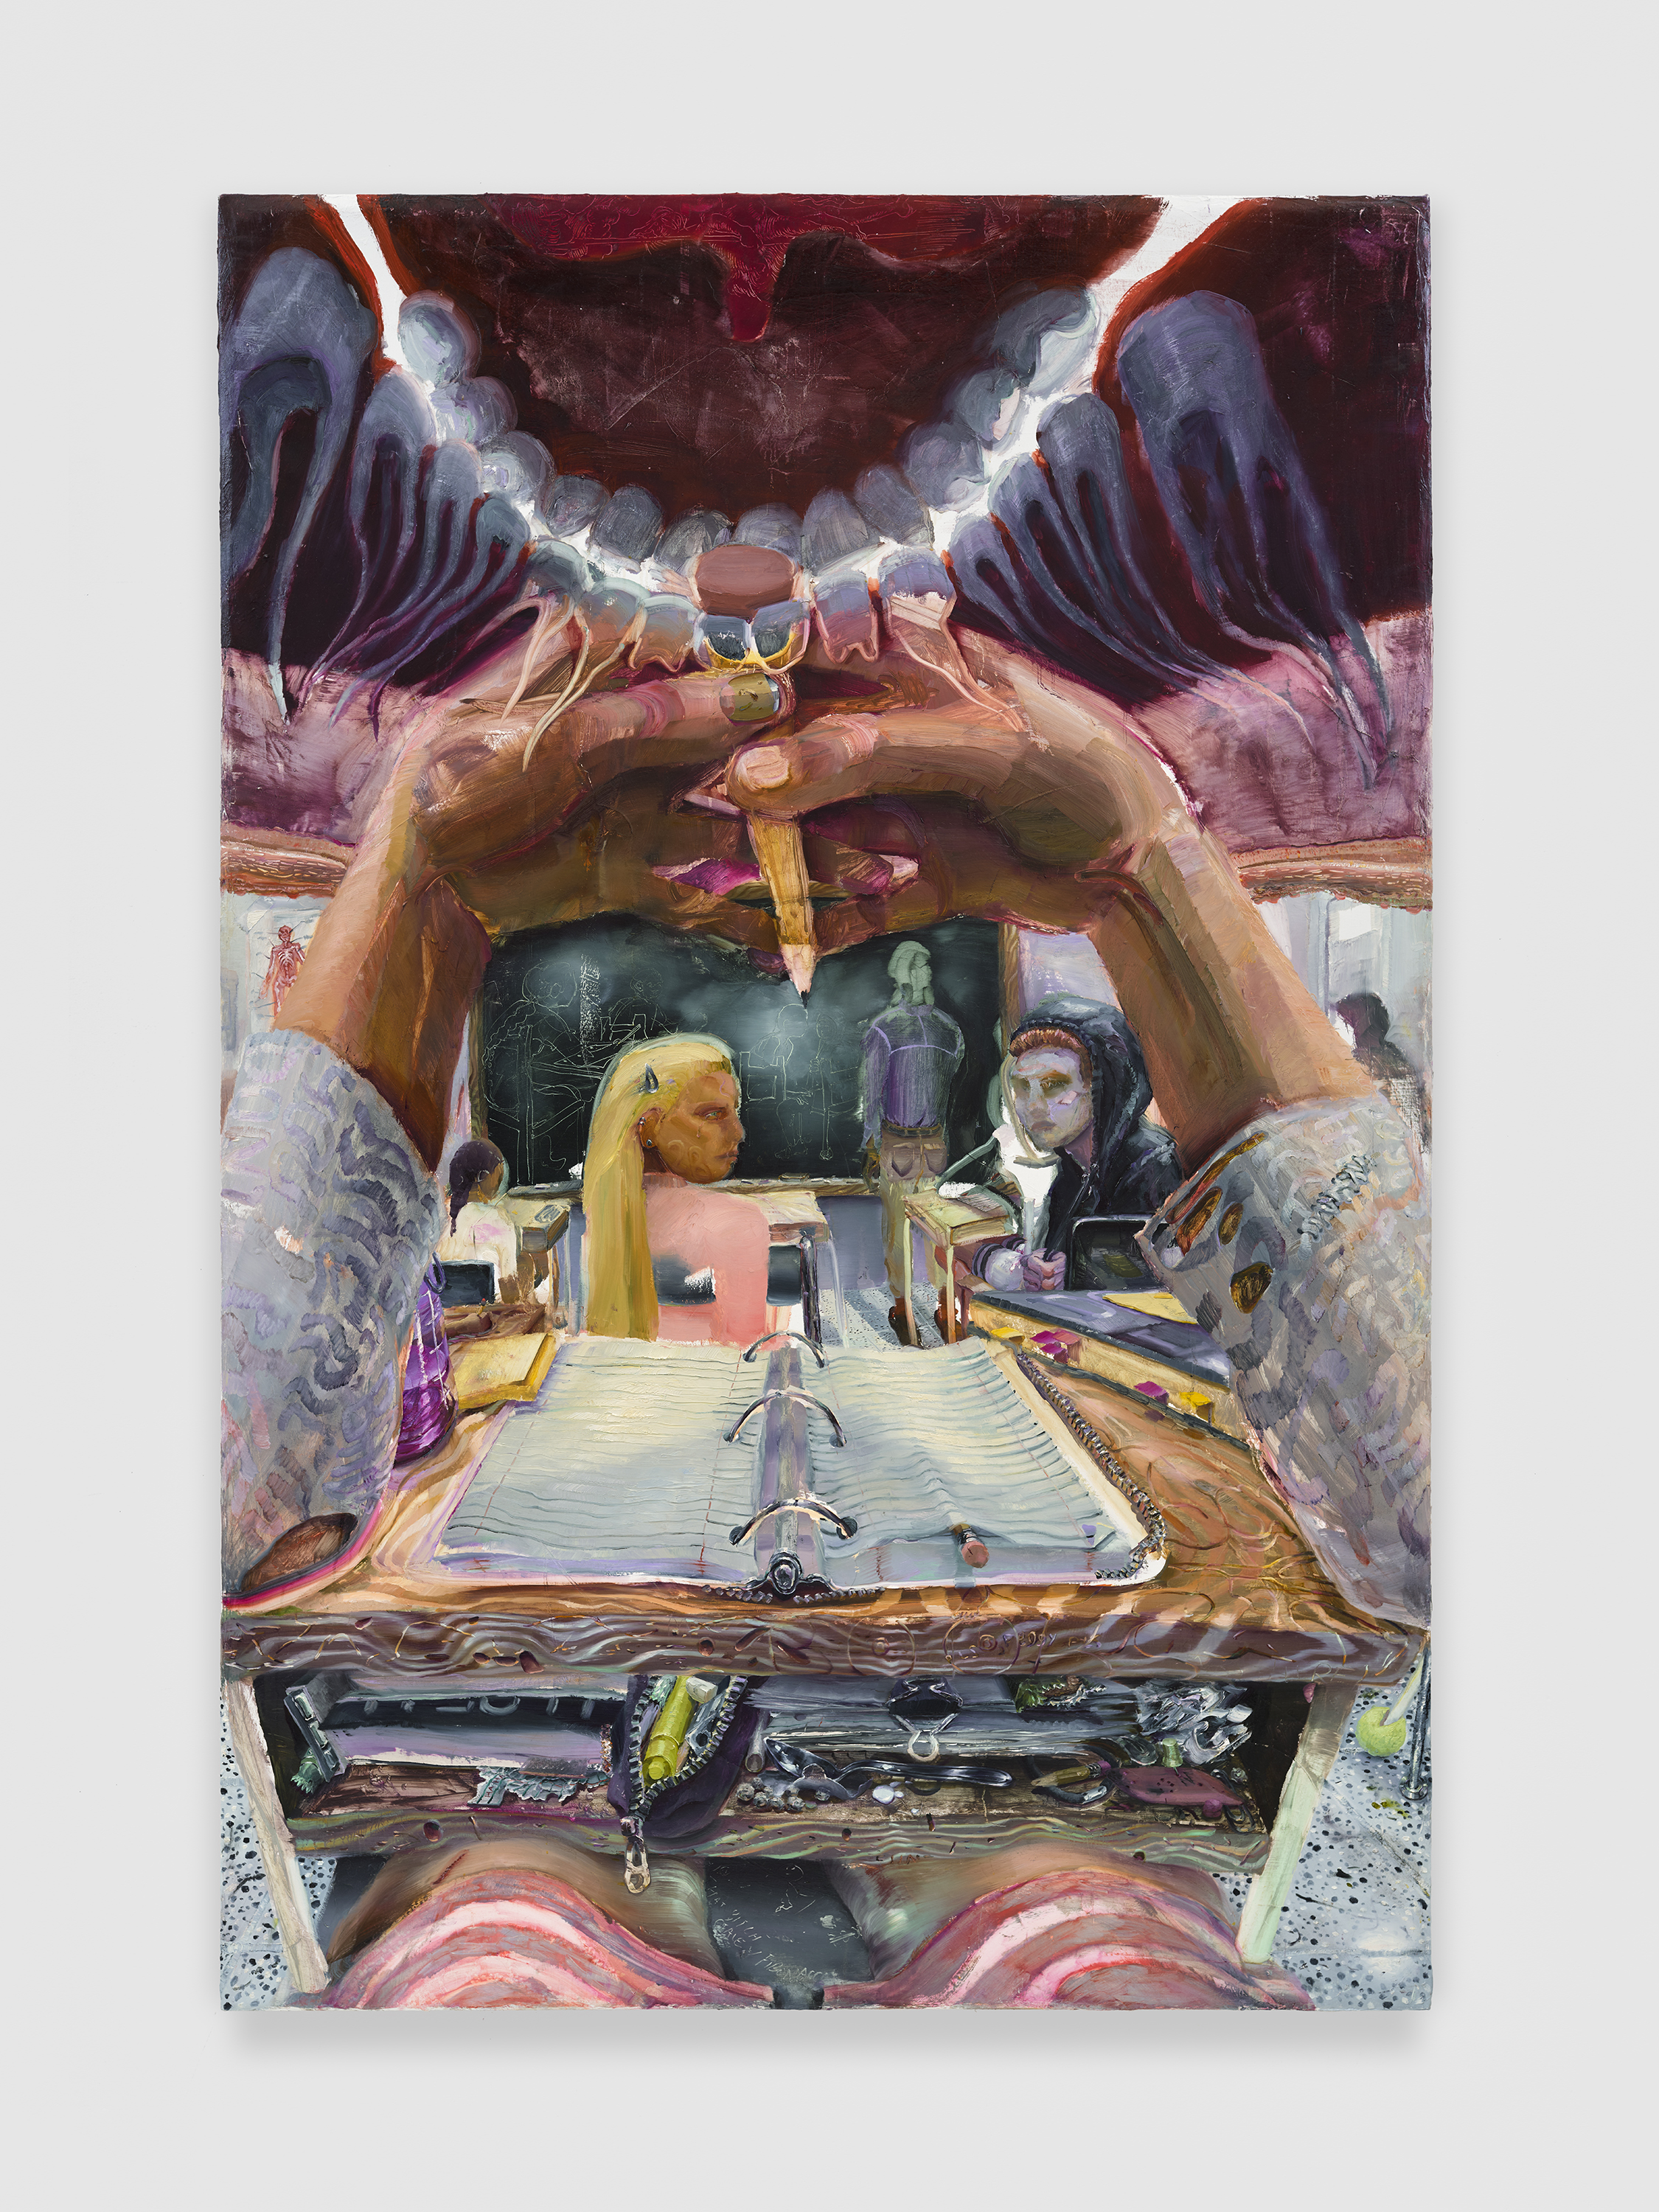 Danica Lundy, Kissing cavity, 2021, Oil on canvas, 72h x 48w x 1.50d in. Photography by Shark Senesac. Courtesy of the Artist and Super Dakota, Brussels.